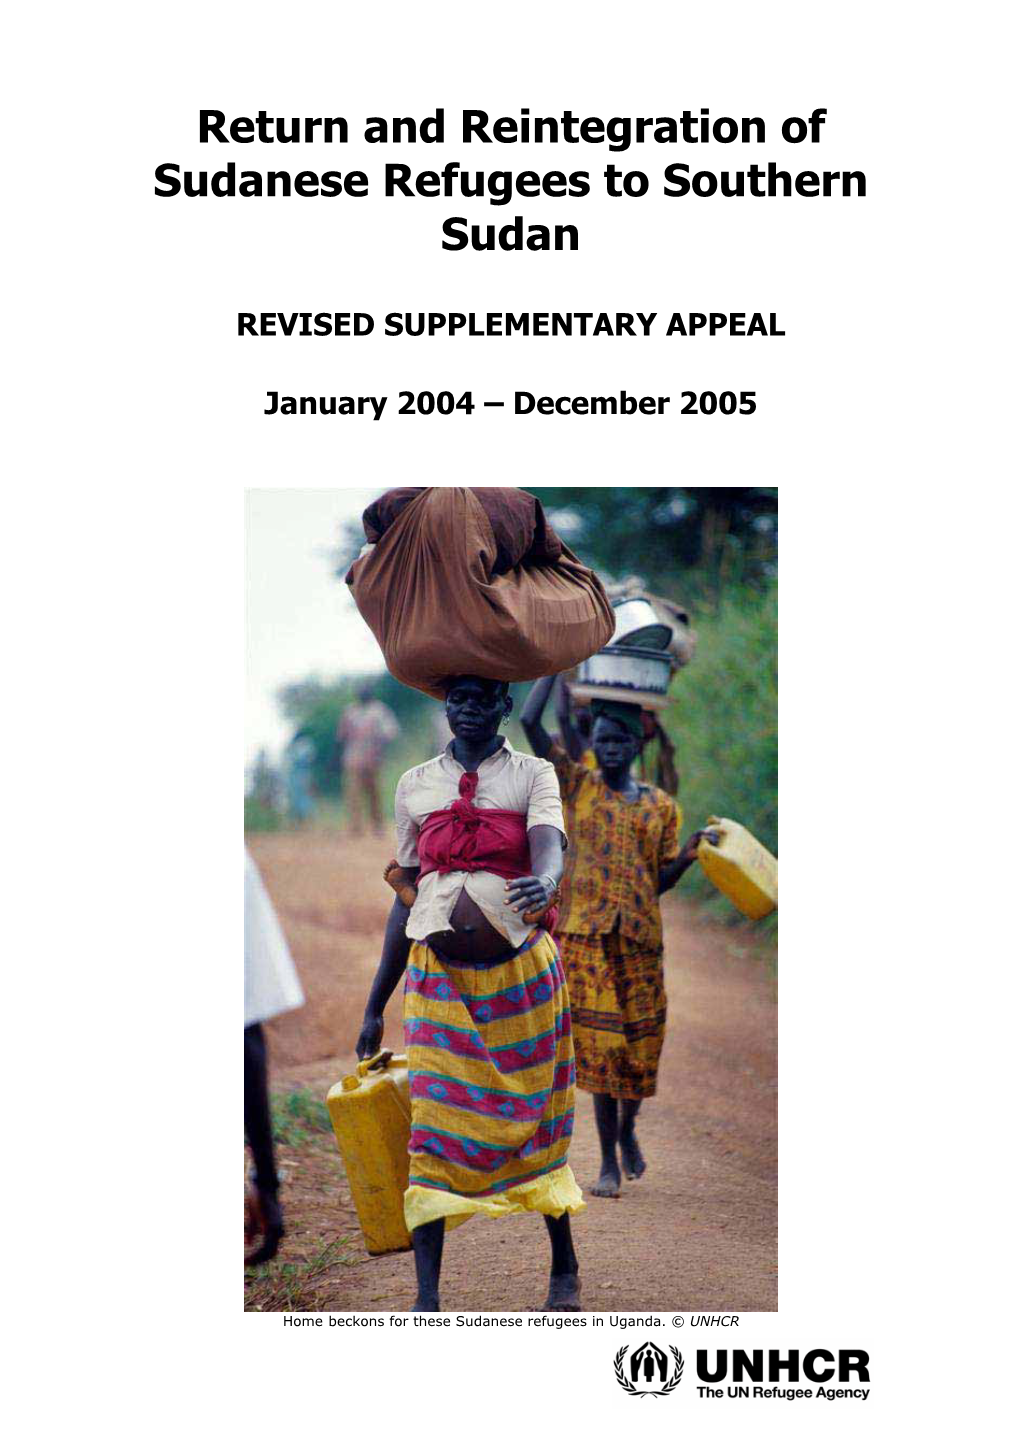 Return and Reintegration of Sudanese Refugees to Southern Sudan